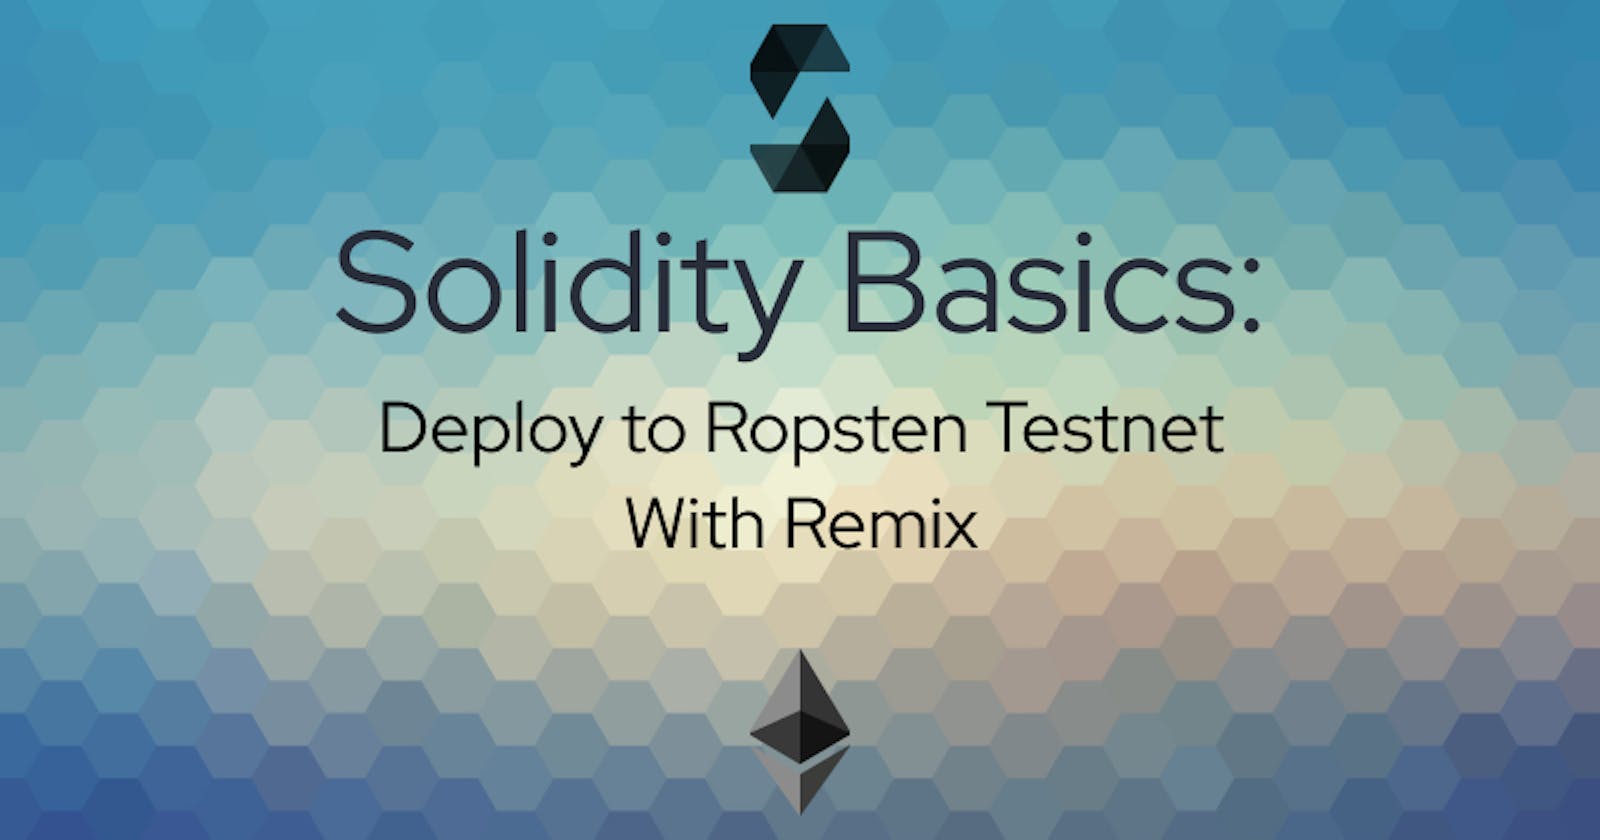 Solidity Basics: Deploy To Ropsten Testnet With Remix